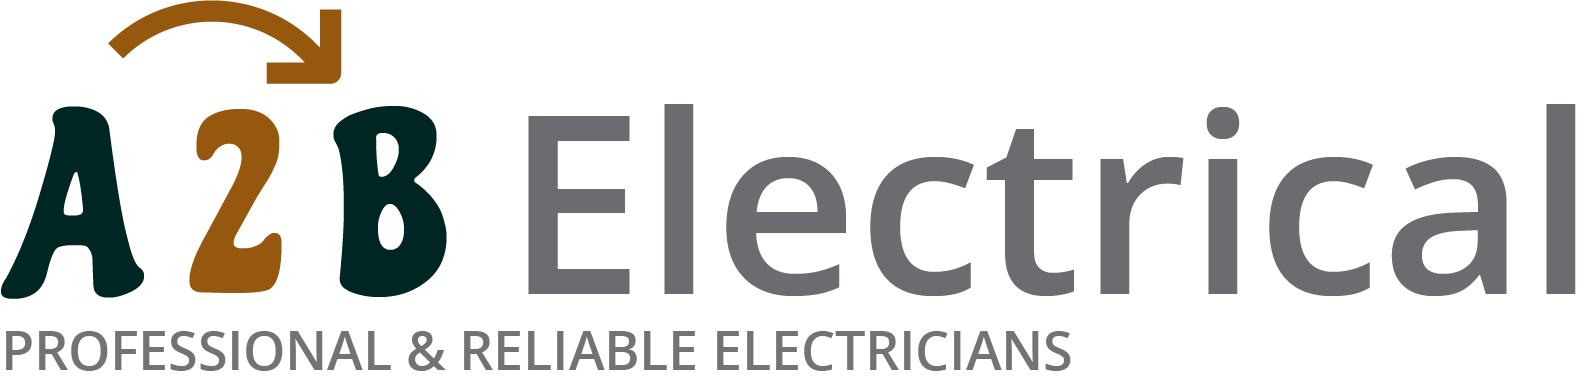 If you have electrical wiring problems in Kings Lynn, we can provide an electrician to have a look for you. 